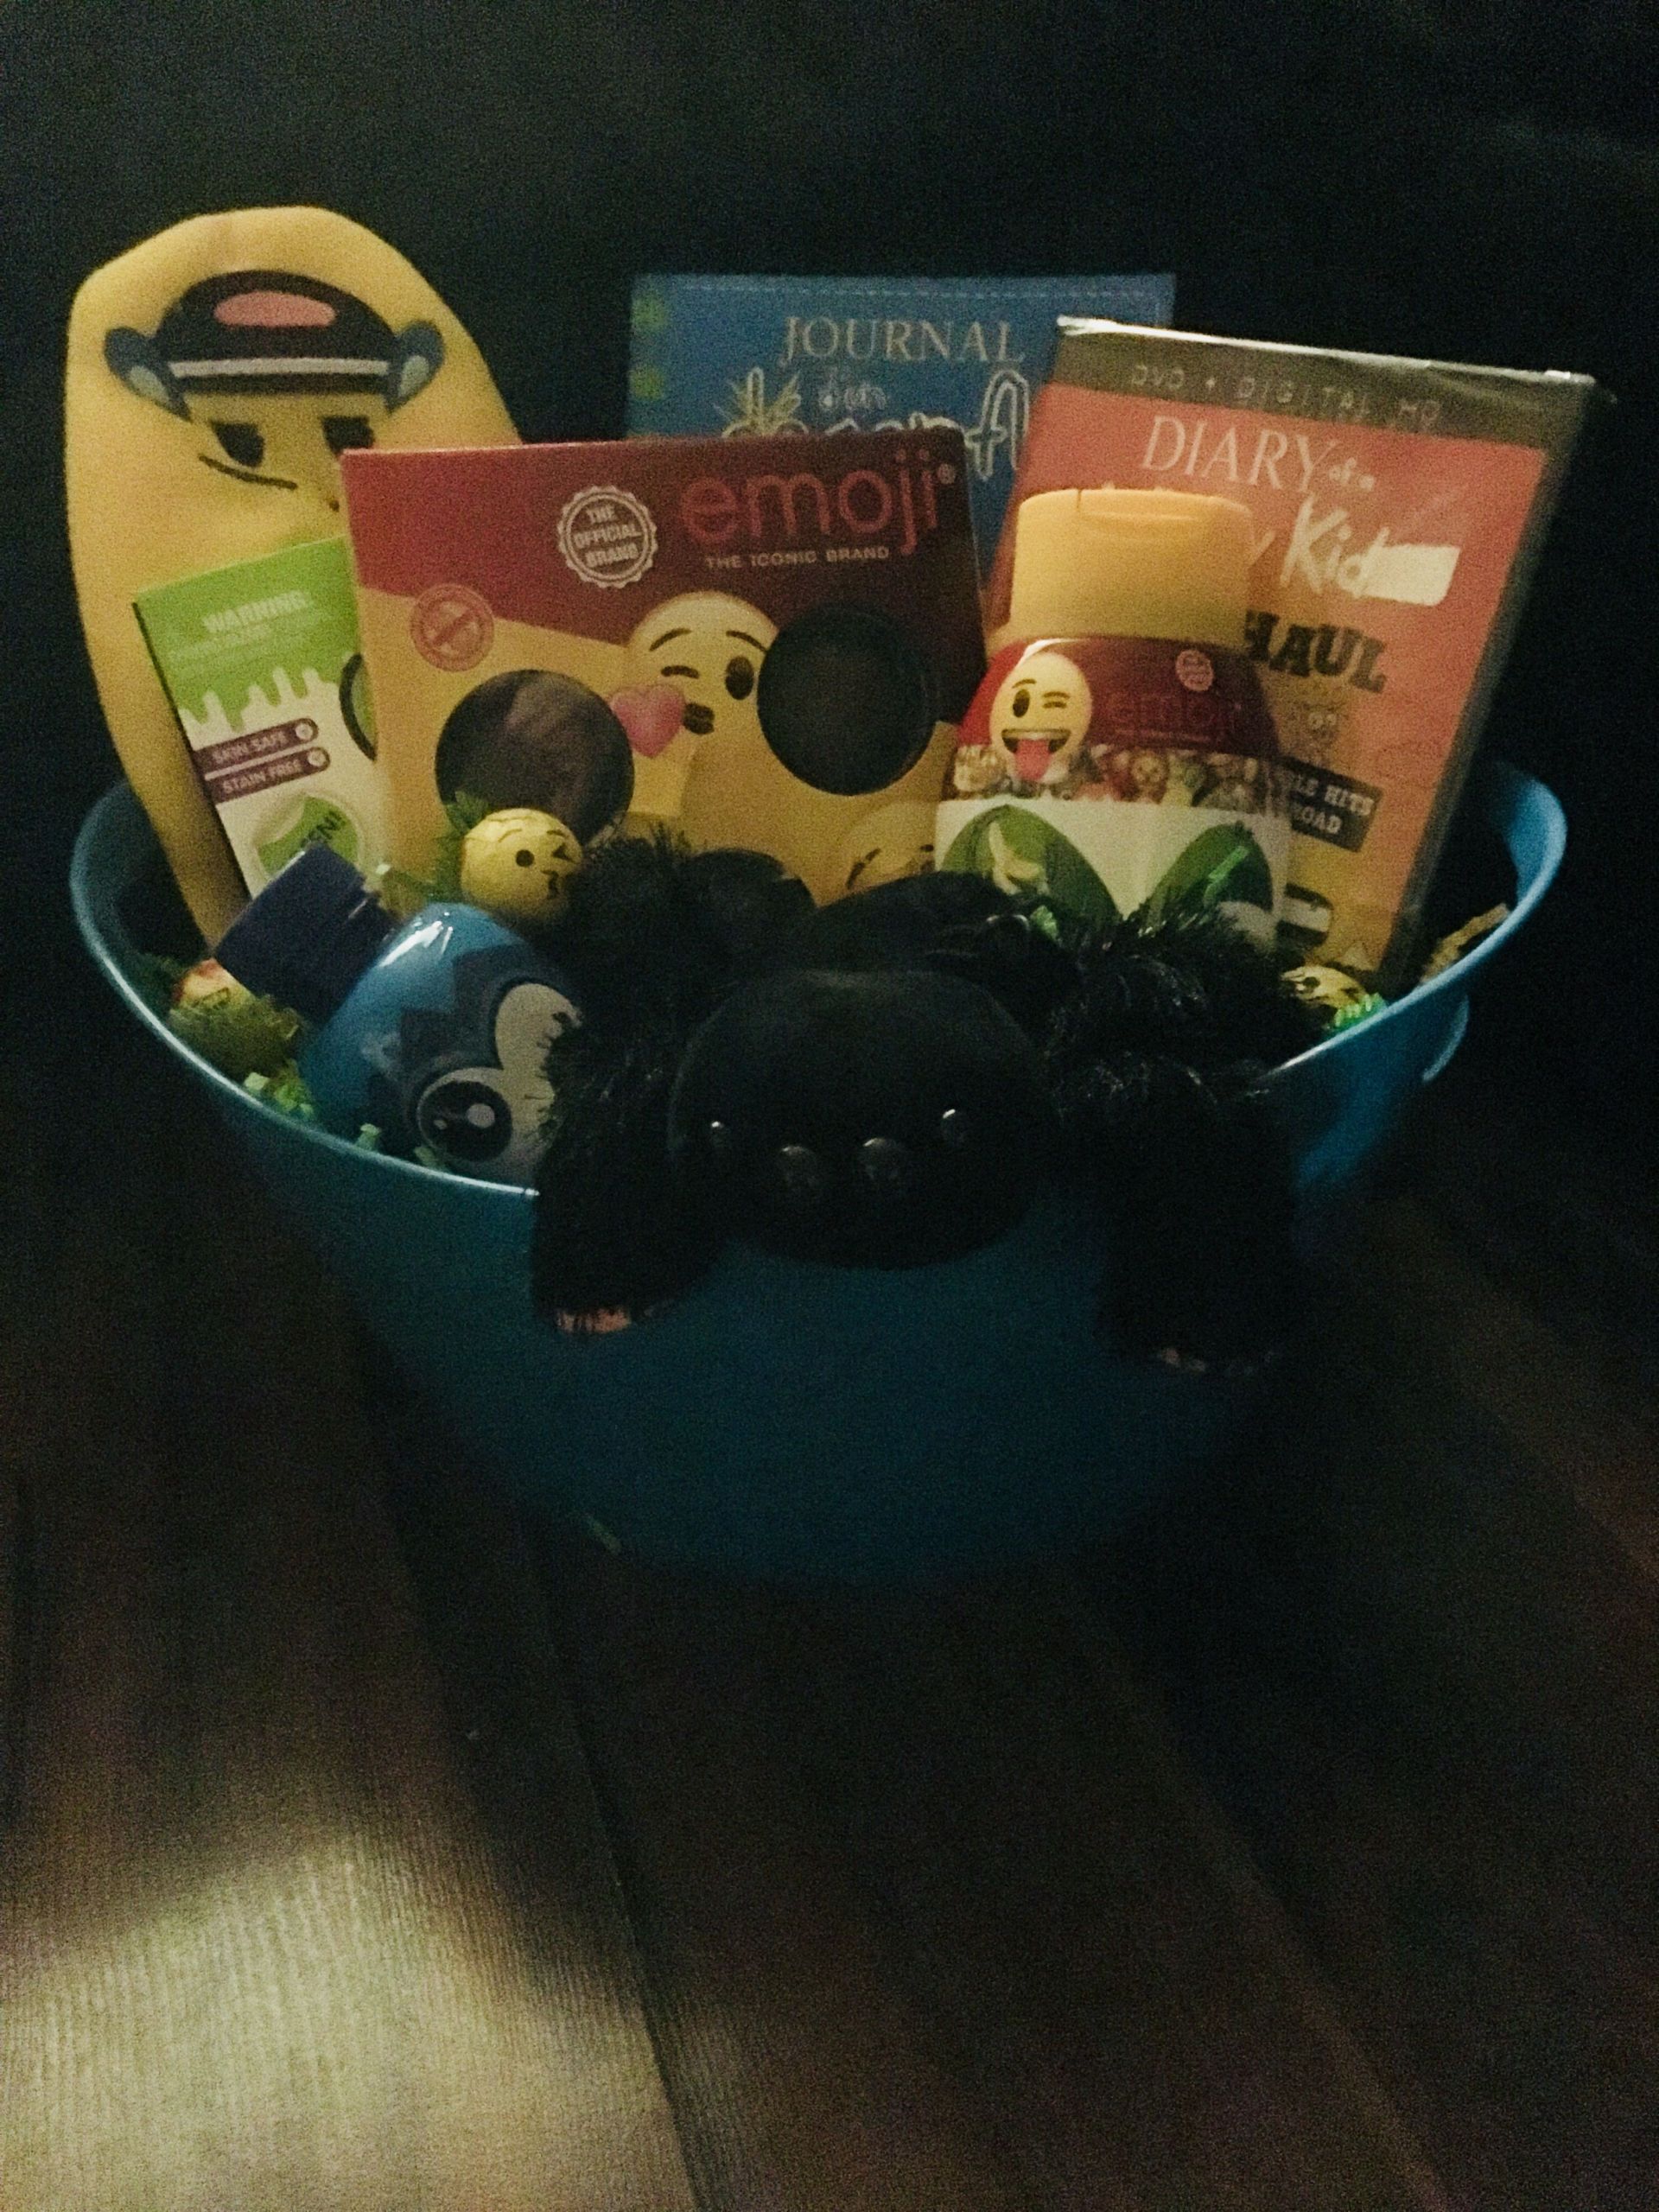 Easter Basket Ideas for 9 Year Old Boy Awesome Easter Basket for 9 Year Old Boy Scentsy Emoji Diary Of